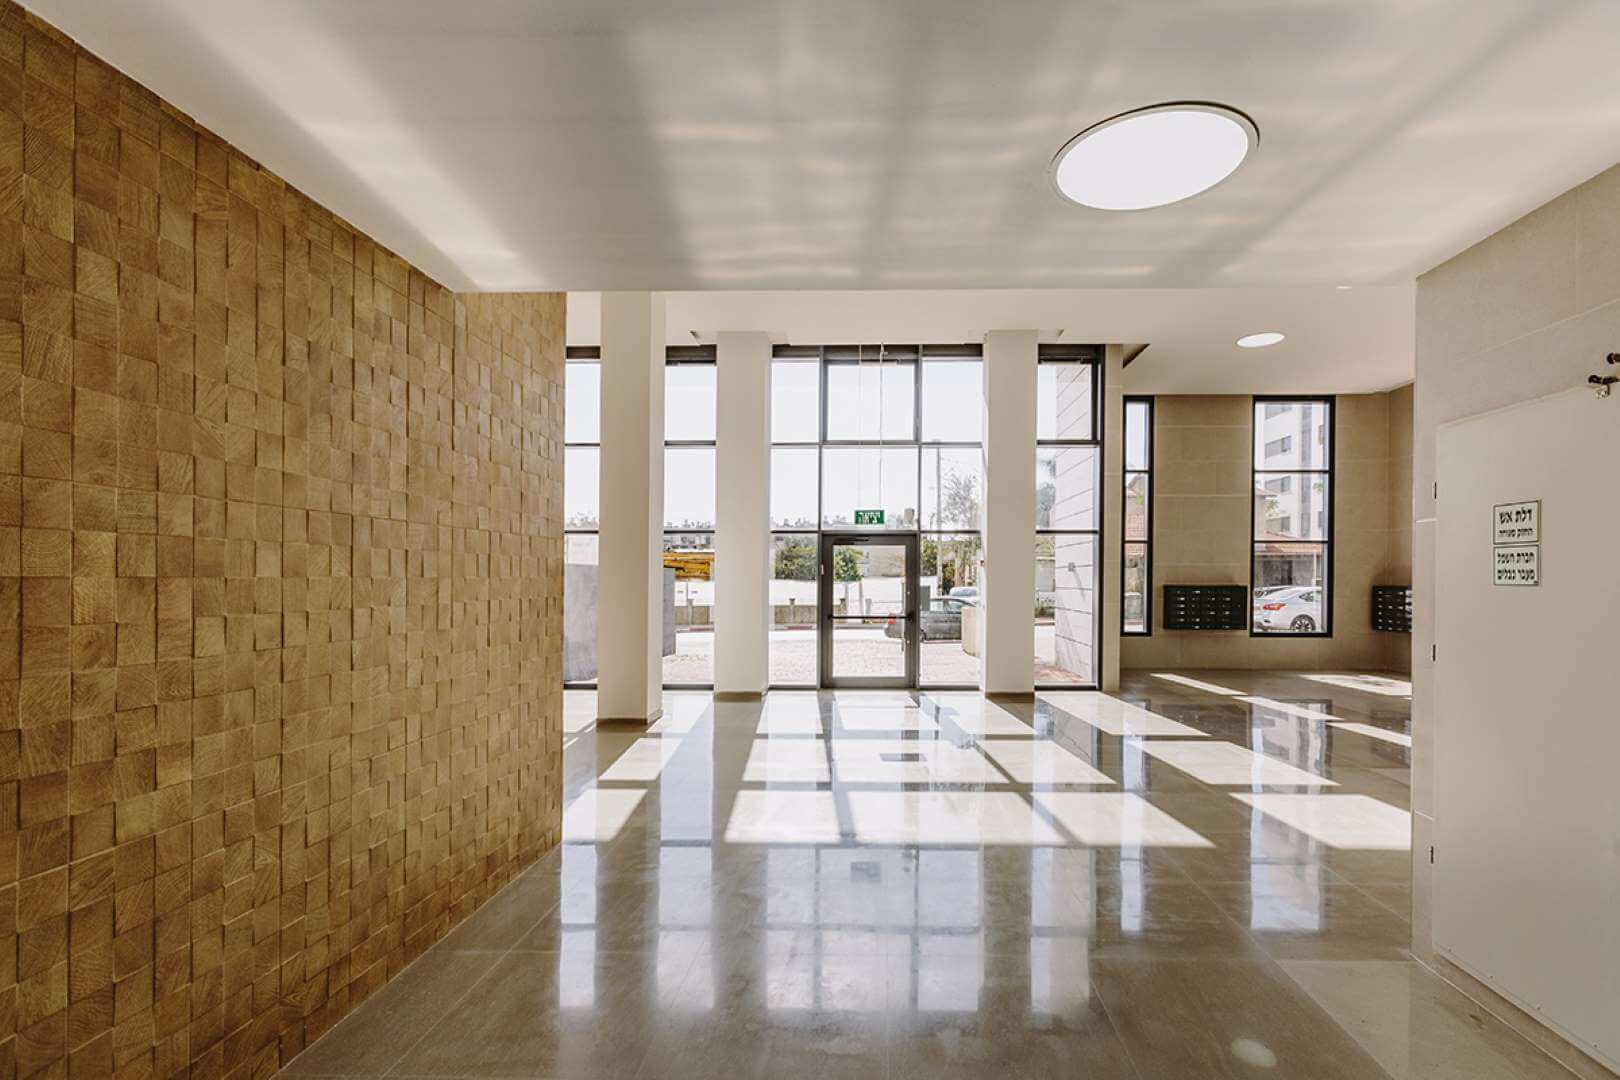 Photograph of the lobby space of a building from the UNIK ALPHA project in Ramat Gan